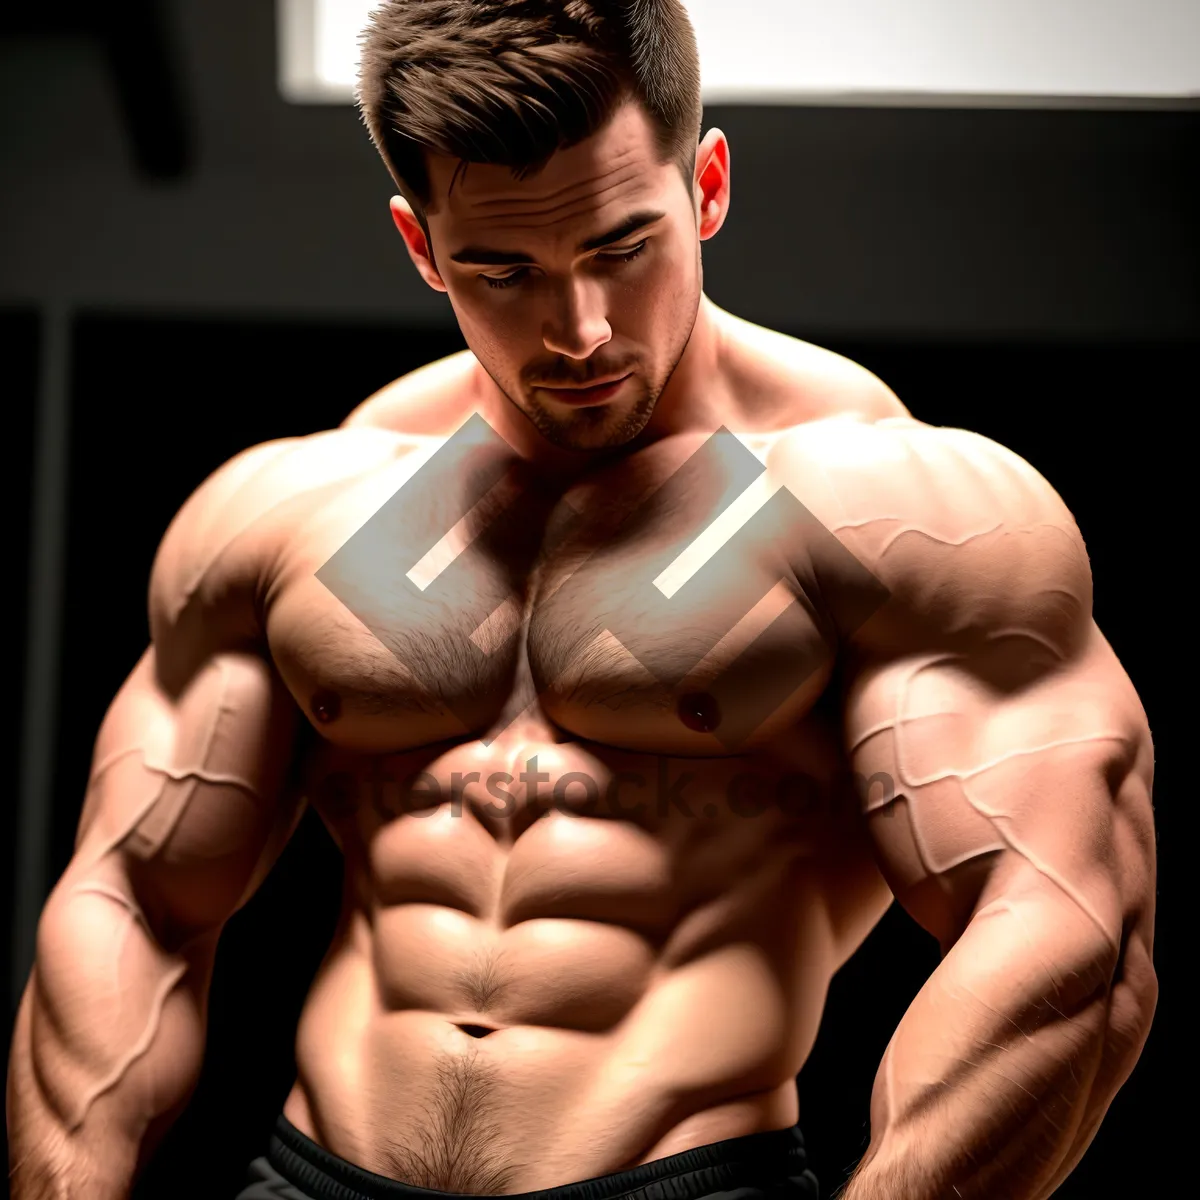 Picture of Muscular male bodybuilder showcasing strength and fitness.